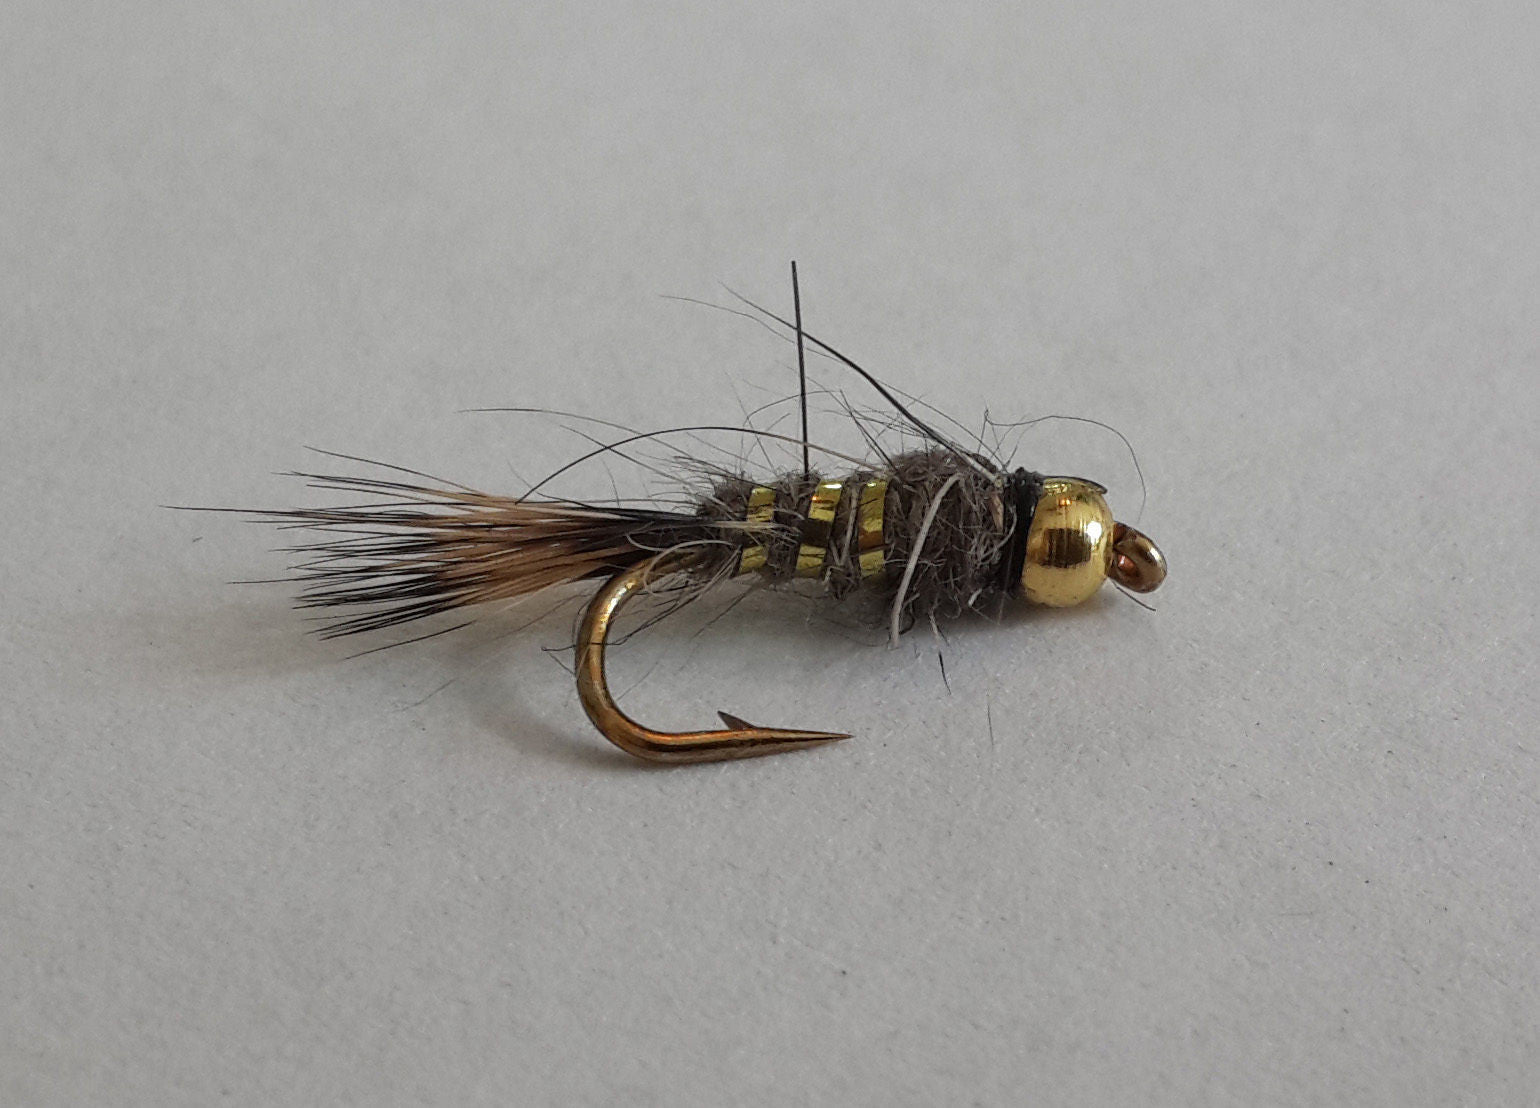 Bead Head Nymph Fly Fishing Flies - Gold Ribbed Hare's Ear Trout Fly - –  Wasatch Tenkara Rods